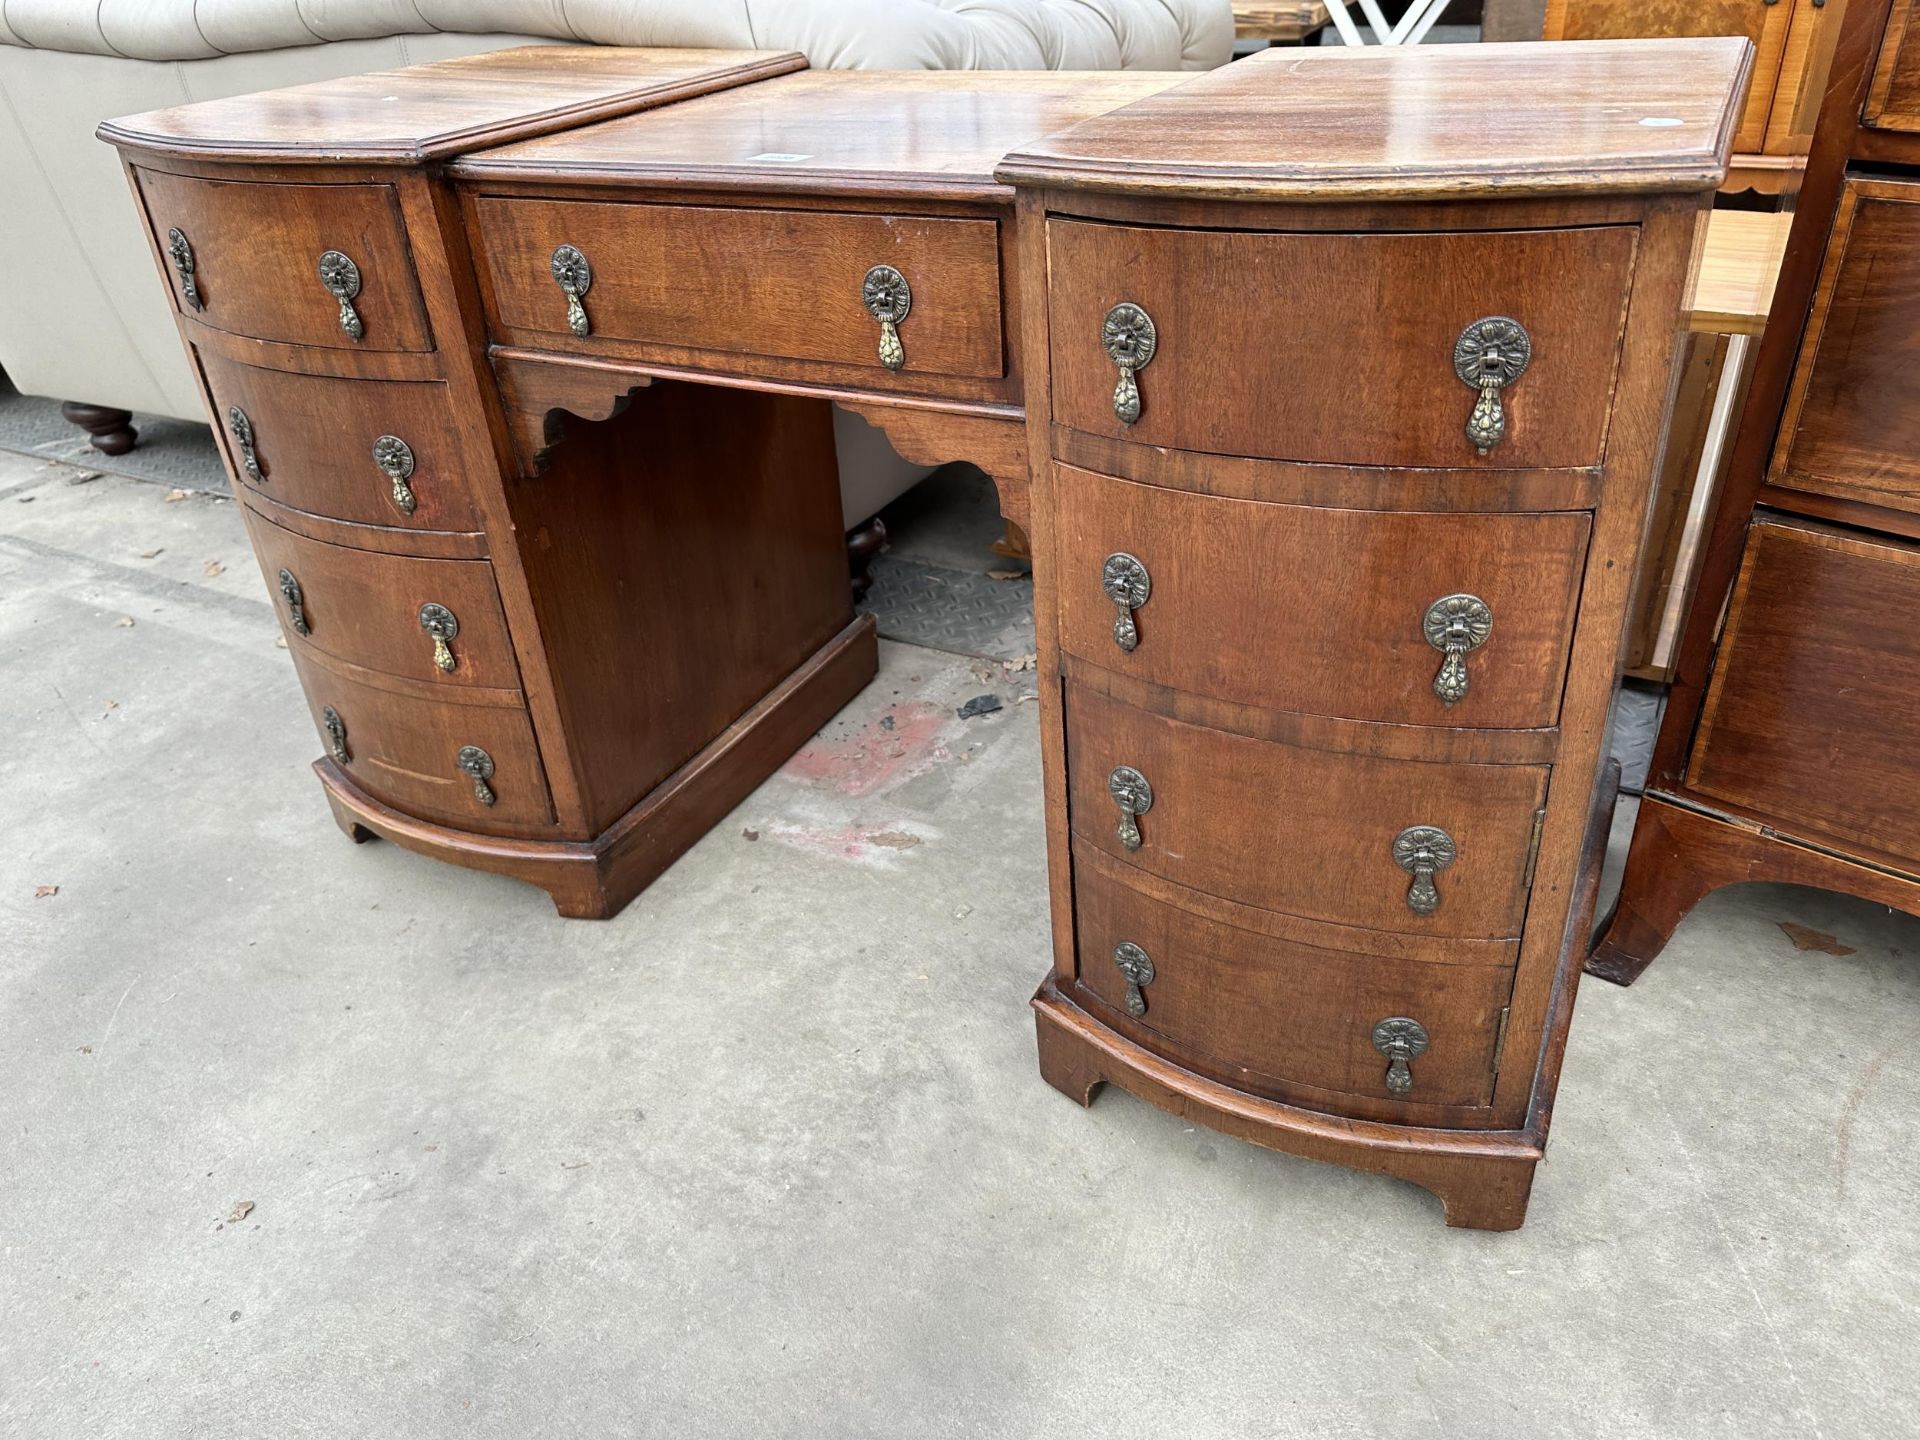 A MID 20TH CENTURY MAHOGANY KNEE-HOLE DESK/DRESSING TABLE, 43.5" WIDE - Image 3 of 3